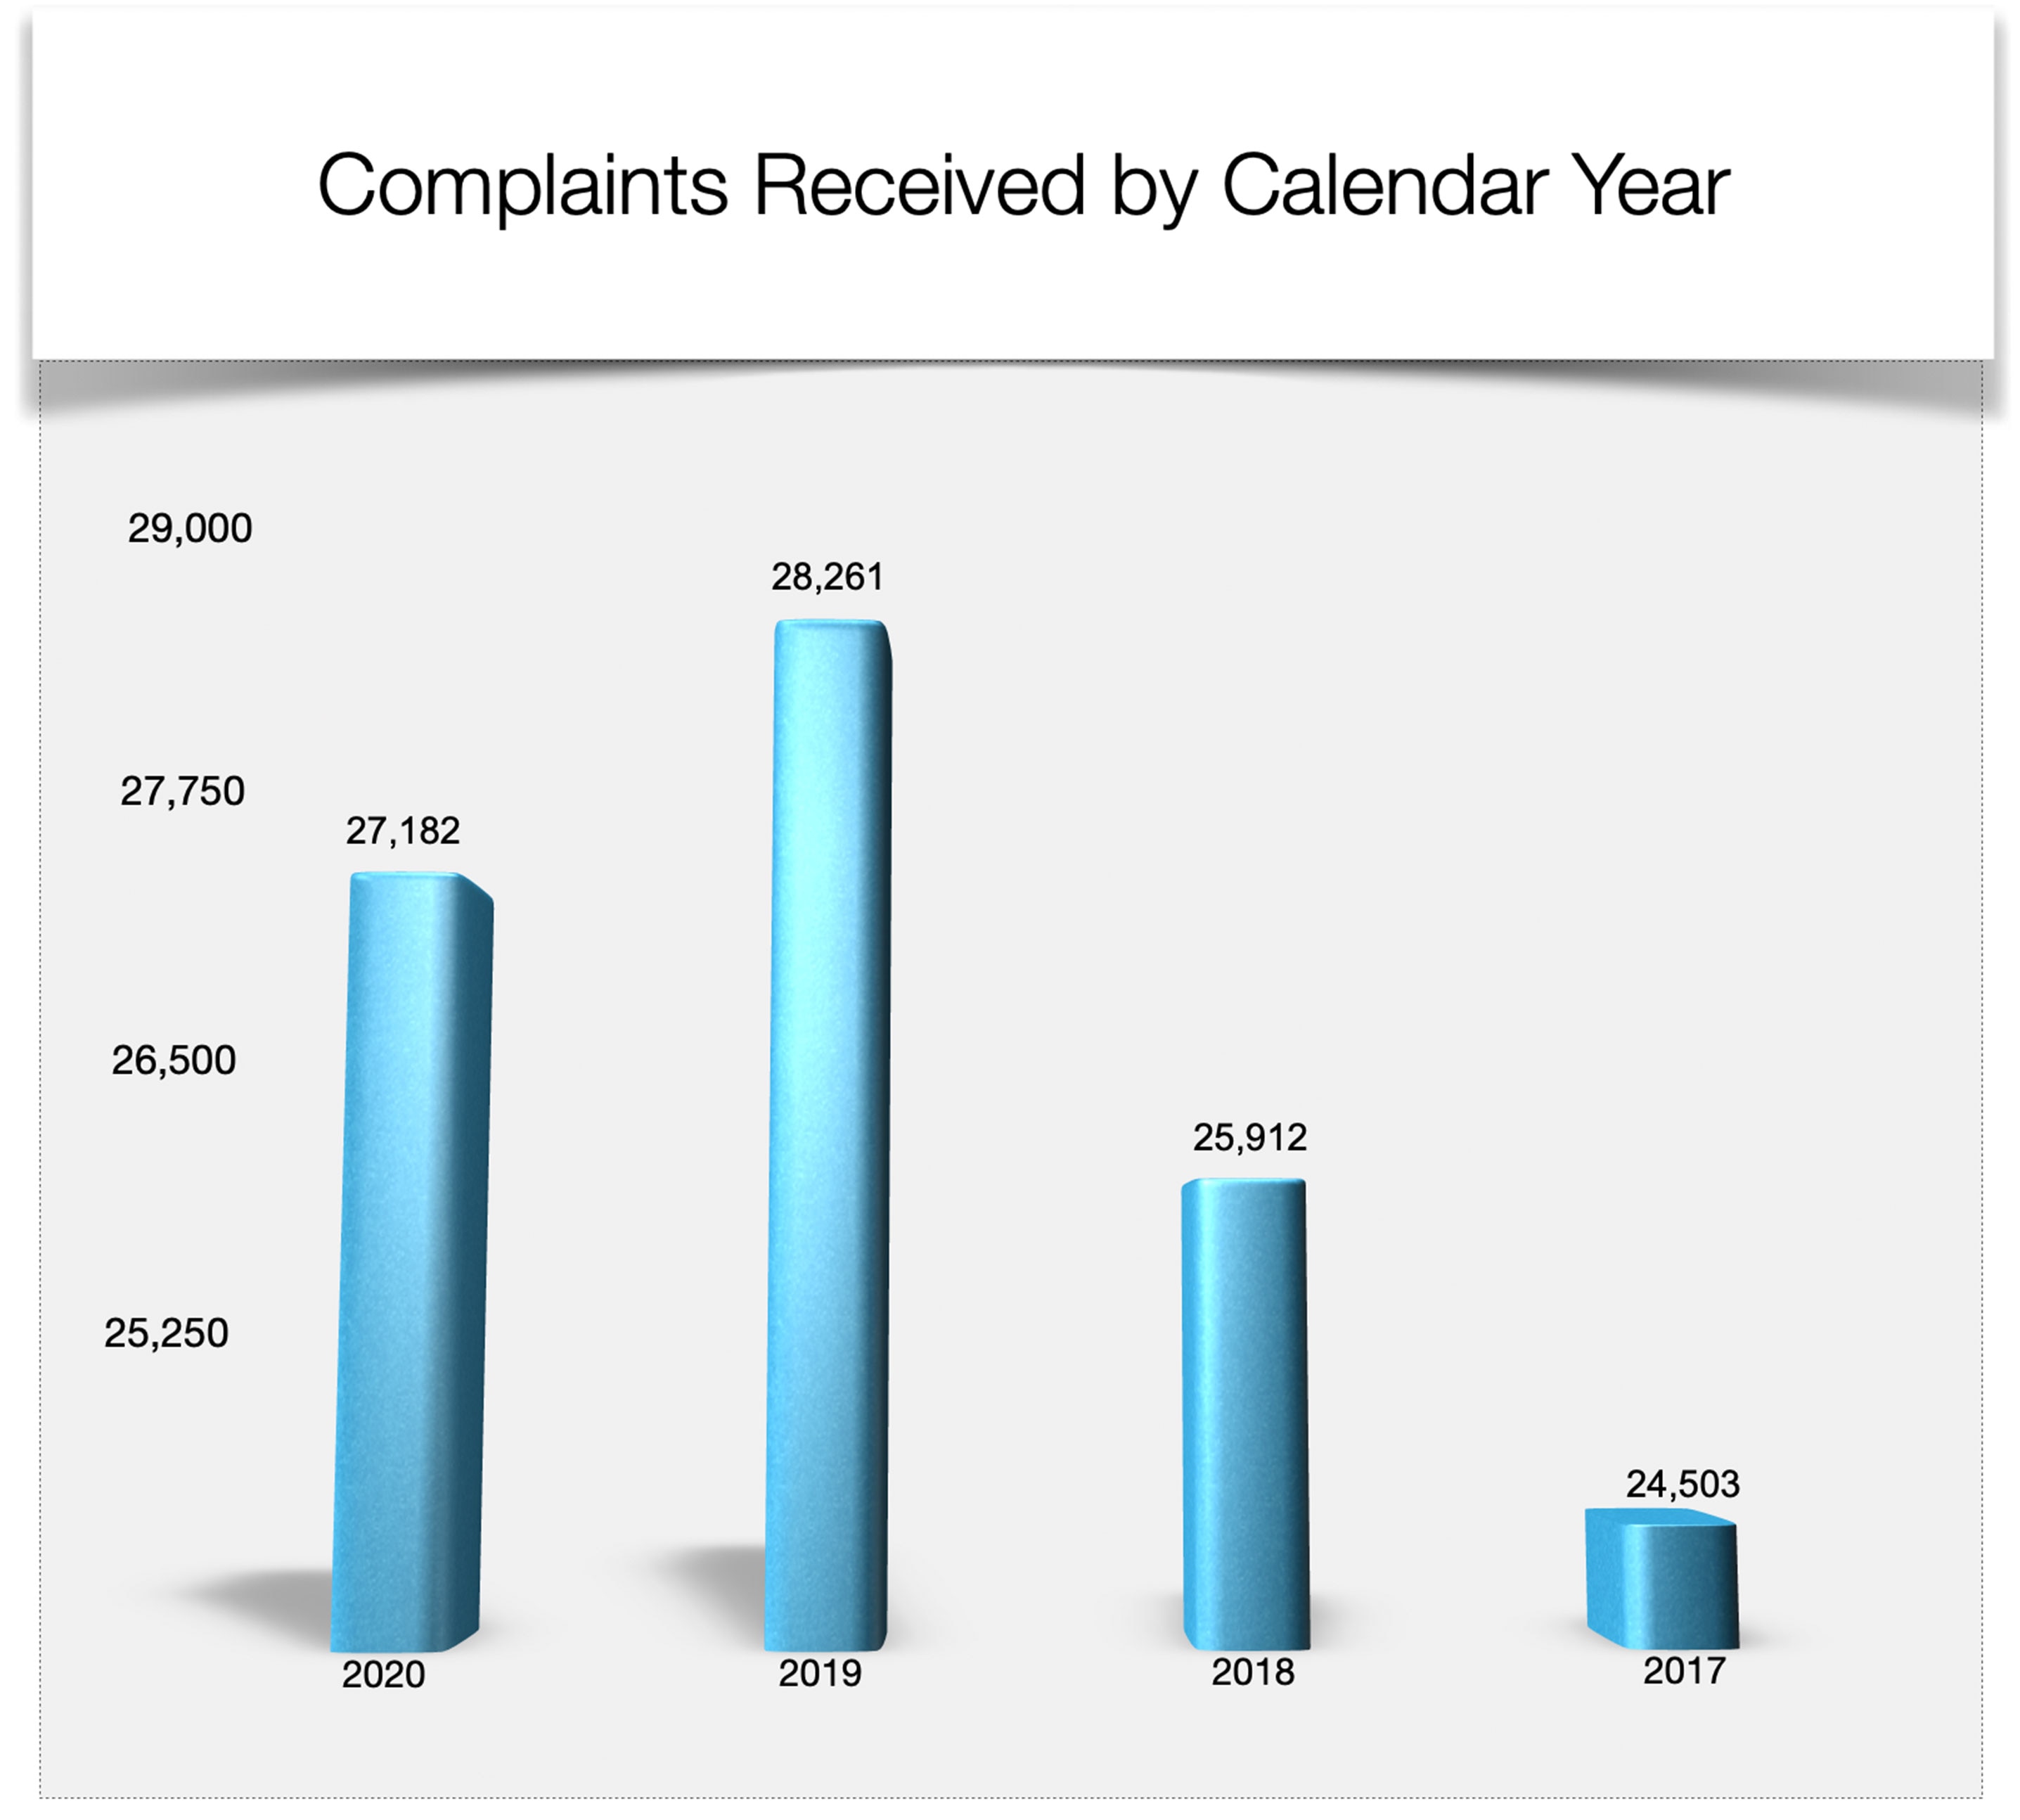 Complaints Received by Calendar Year 2017 - 2020